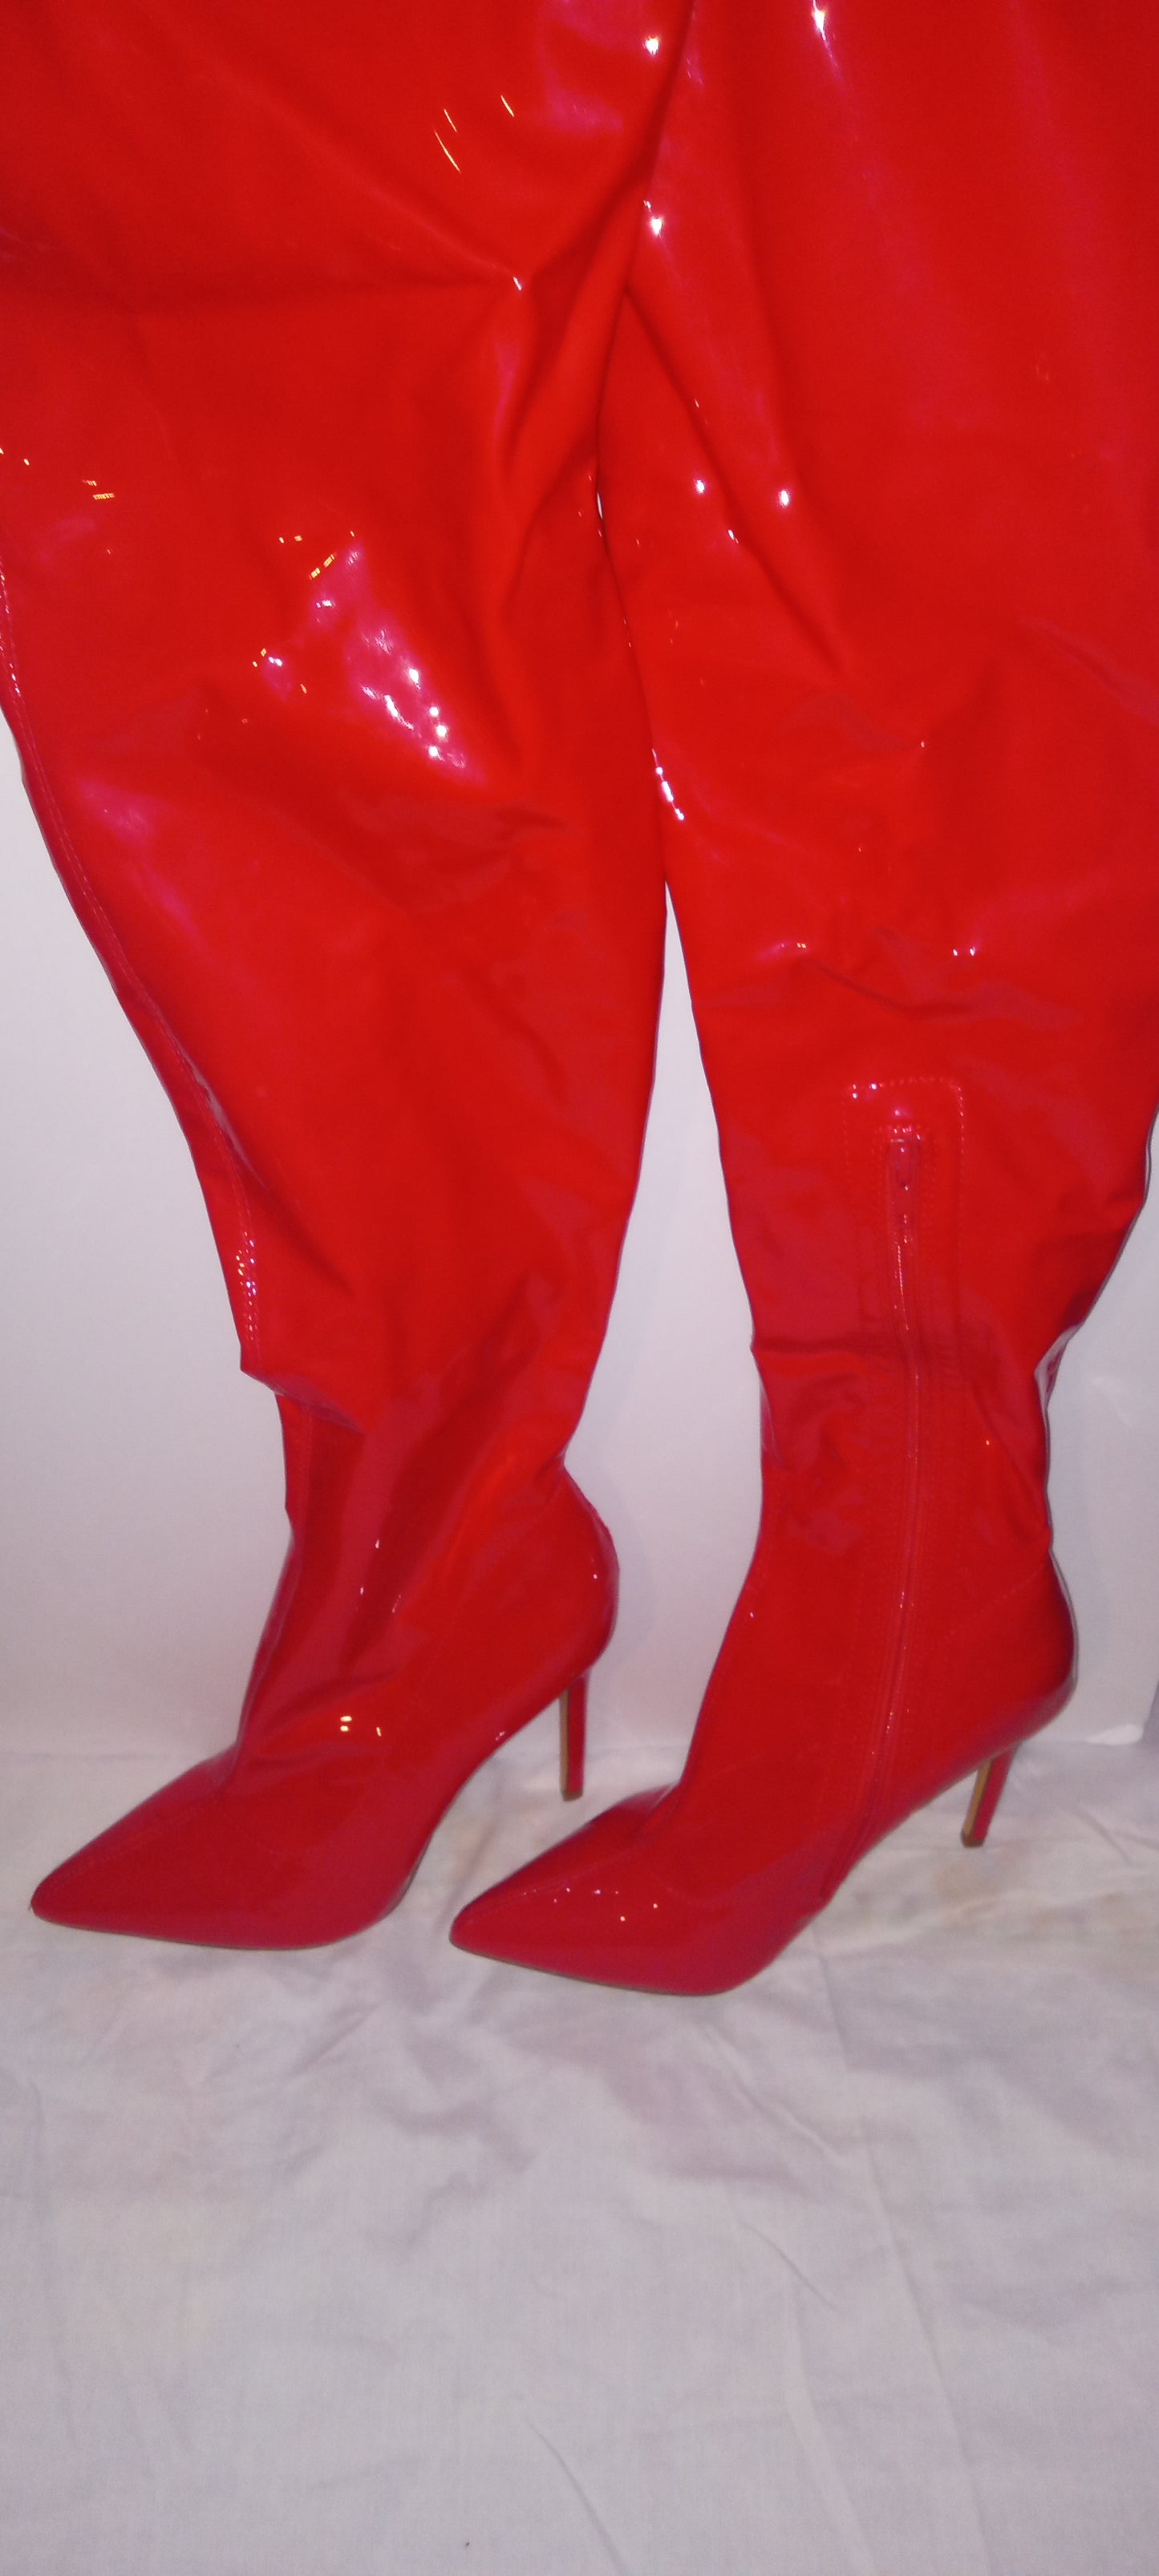 Shoes Woman Long Boots Red Used